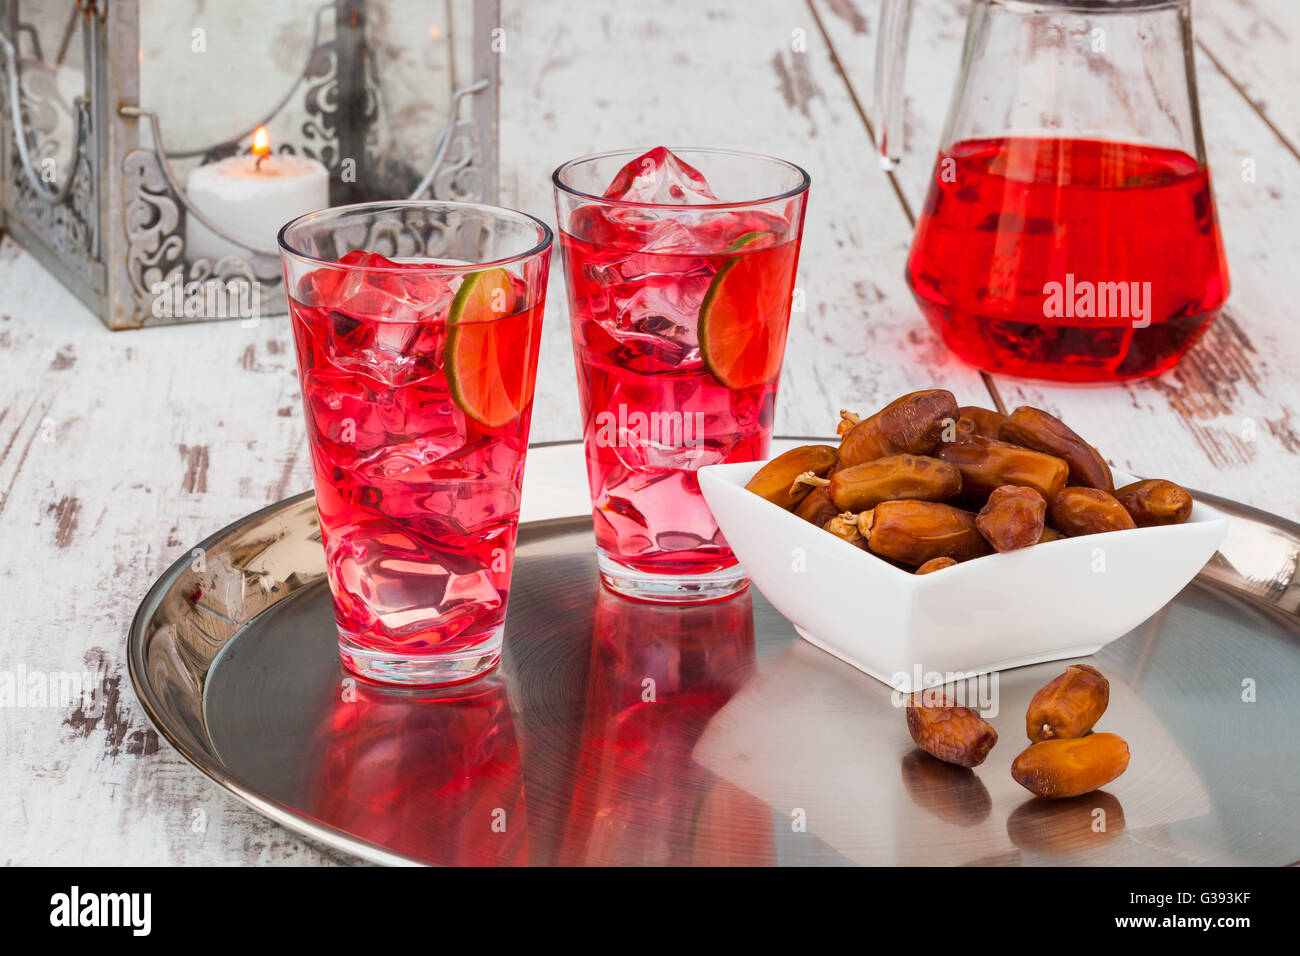 Cold refreshing syrup drink, sweet dates and fruit for iftar break fast during fasting month of Ramadan. Stock Photo